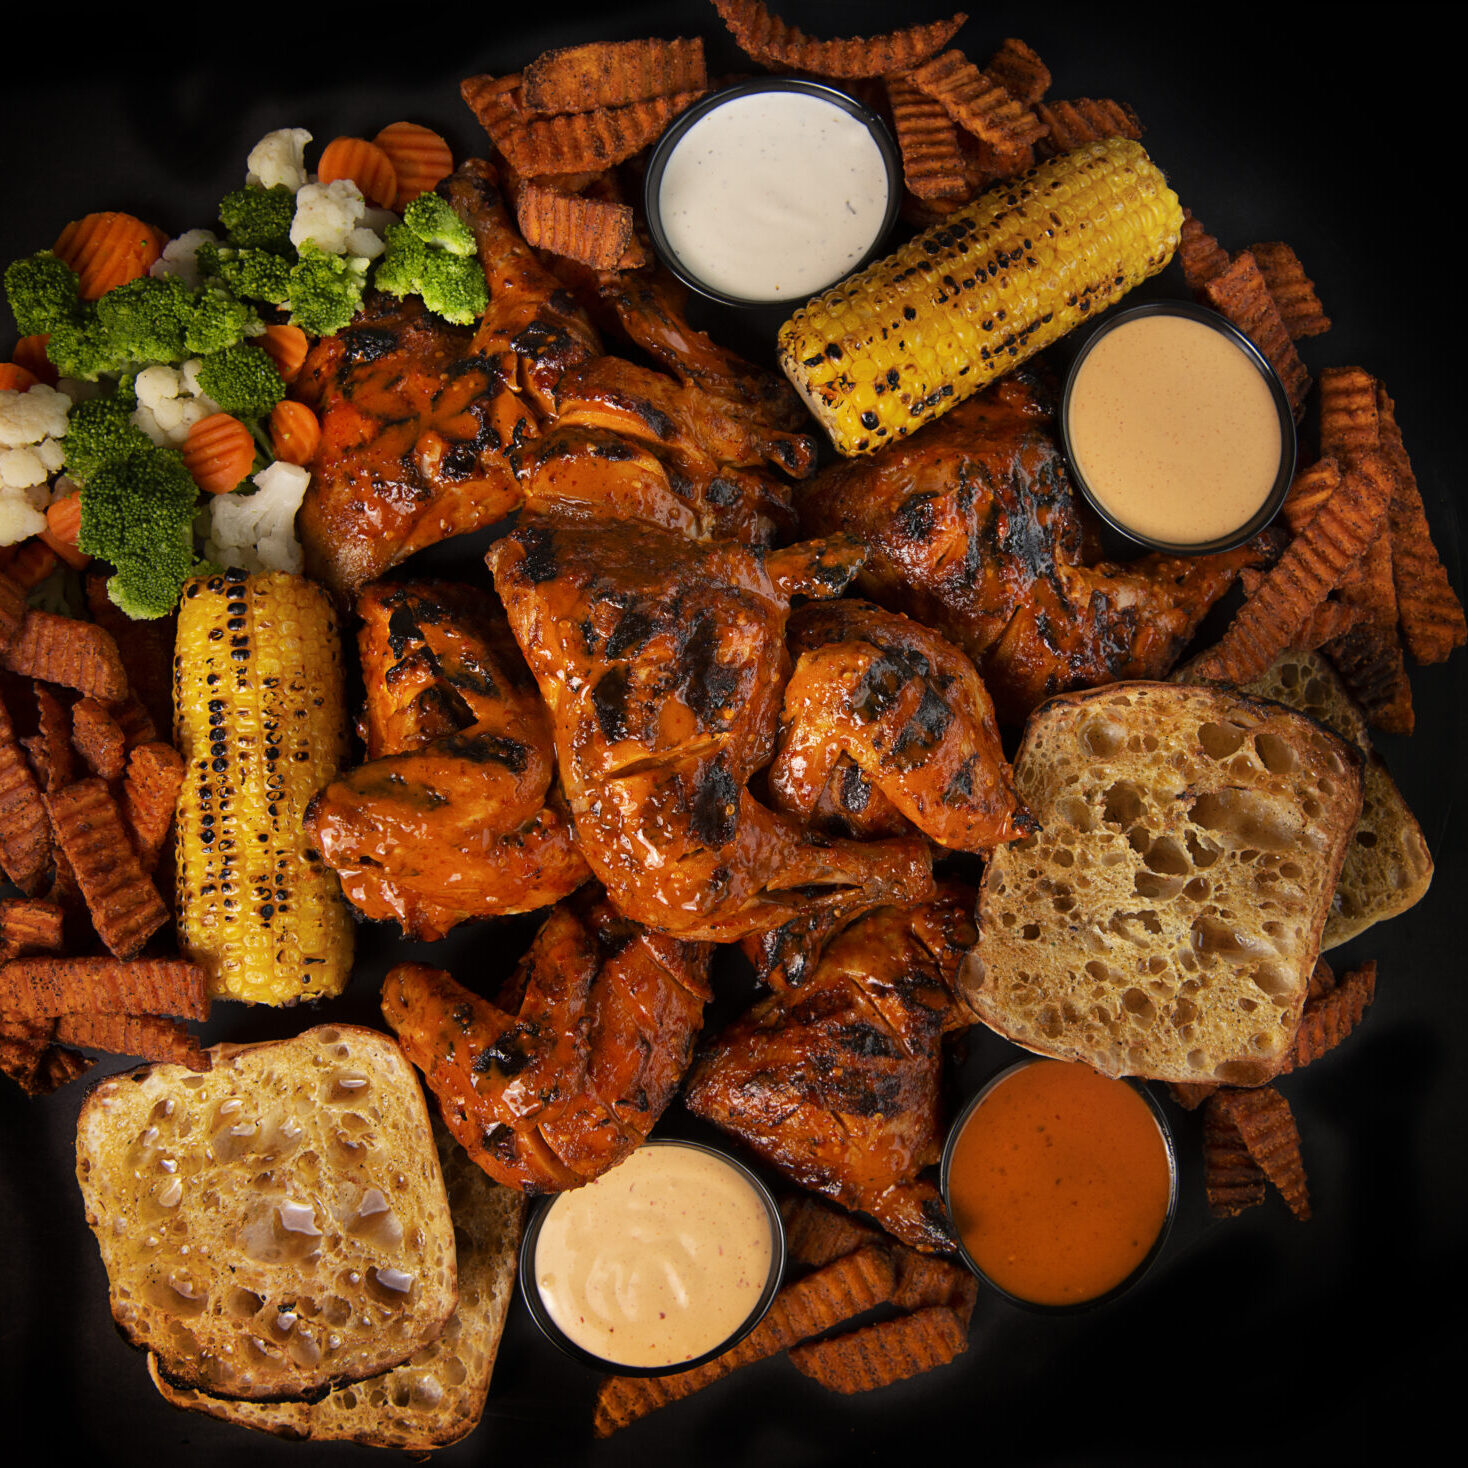 A plate of food with grilled chicken, corn and carrots.